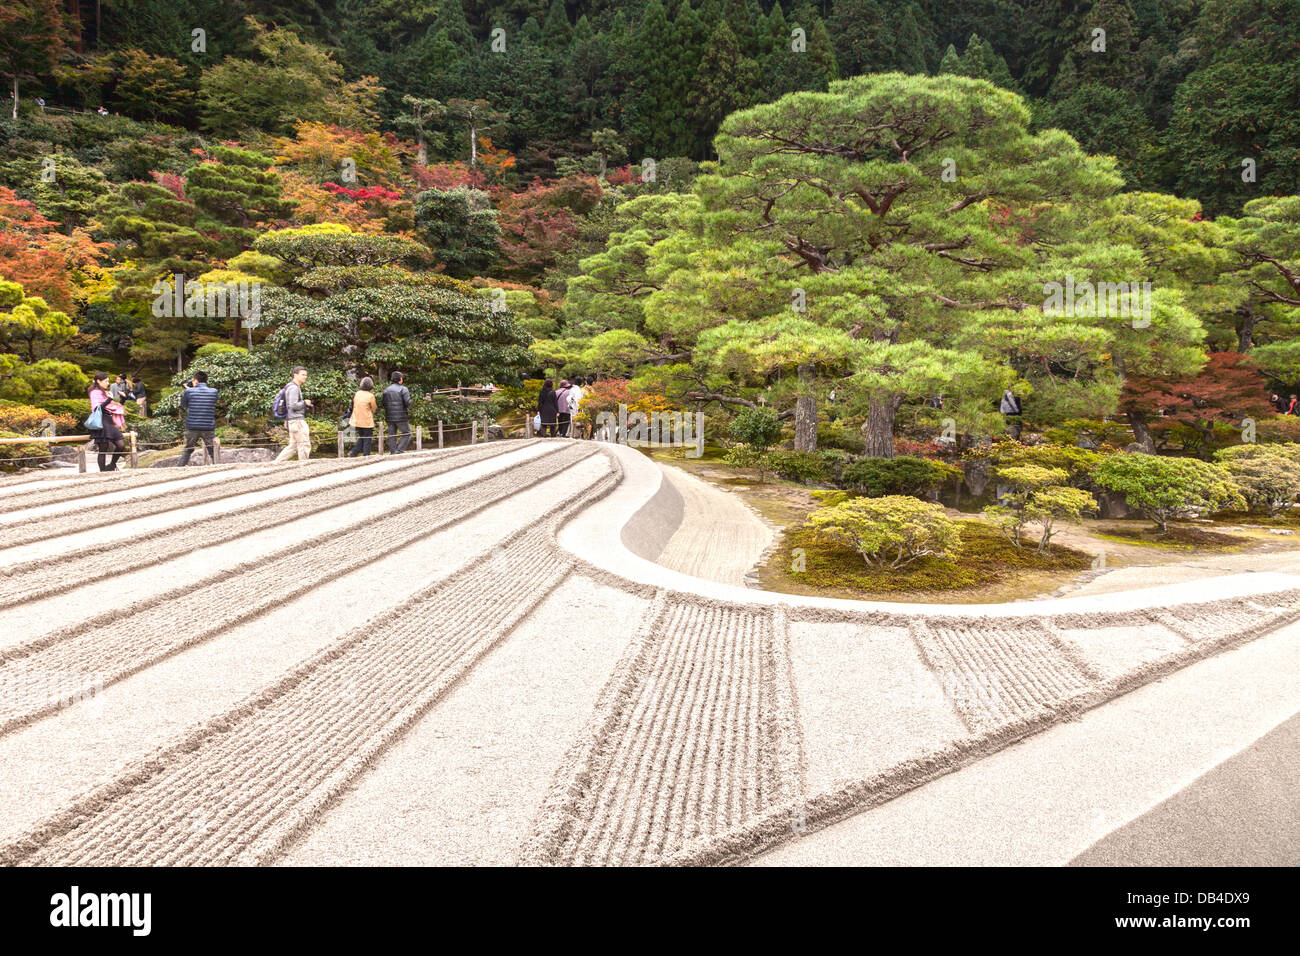 Part of the gardens of the temple of Ginkaku-ji or Jisho-ji in Kyoto, seen in autumn. This Zen Buddhist temple is a notable Stock Photo